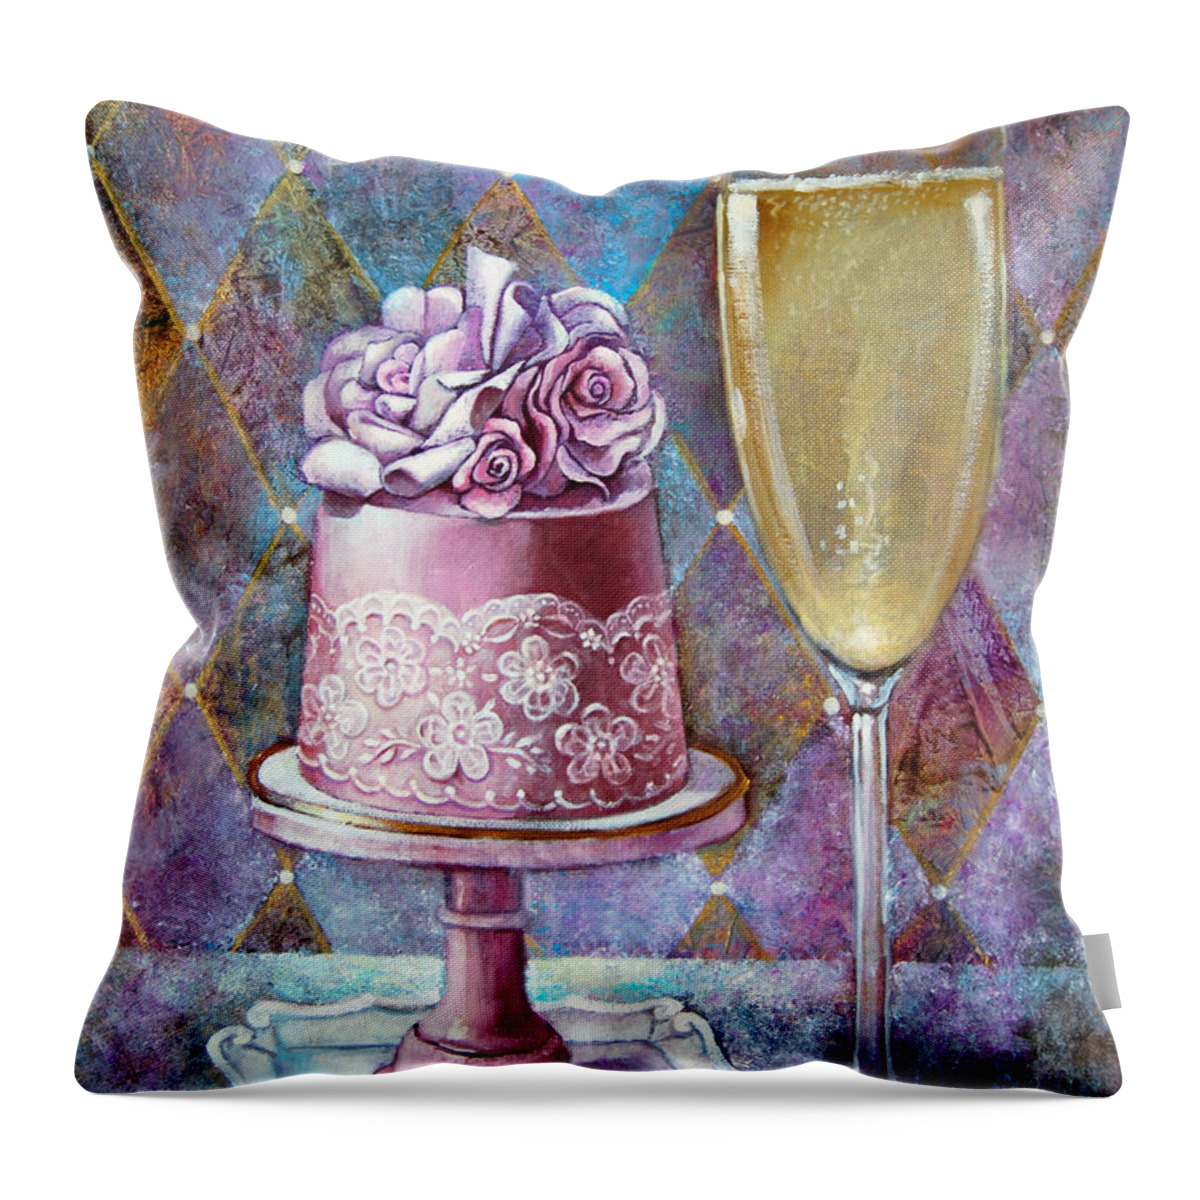 Vino Throw Pillow featuring the painting Butter Cream Rose Cake by Geraldine Arata